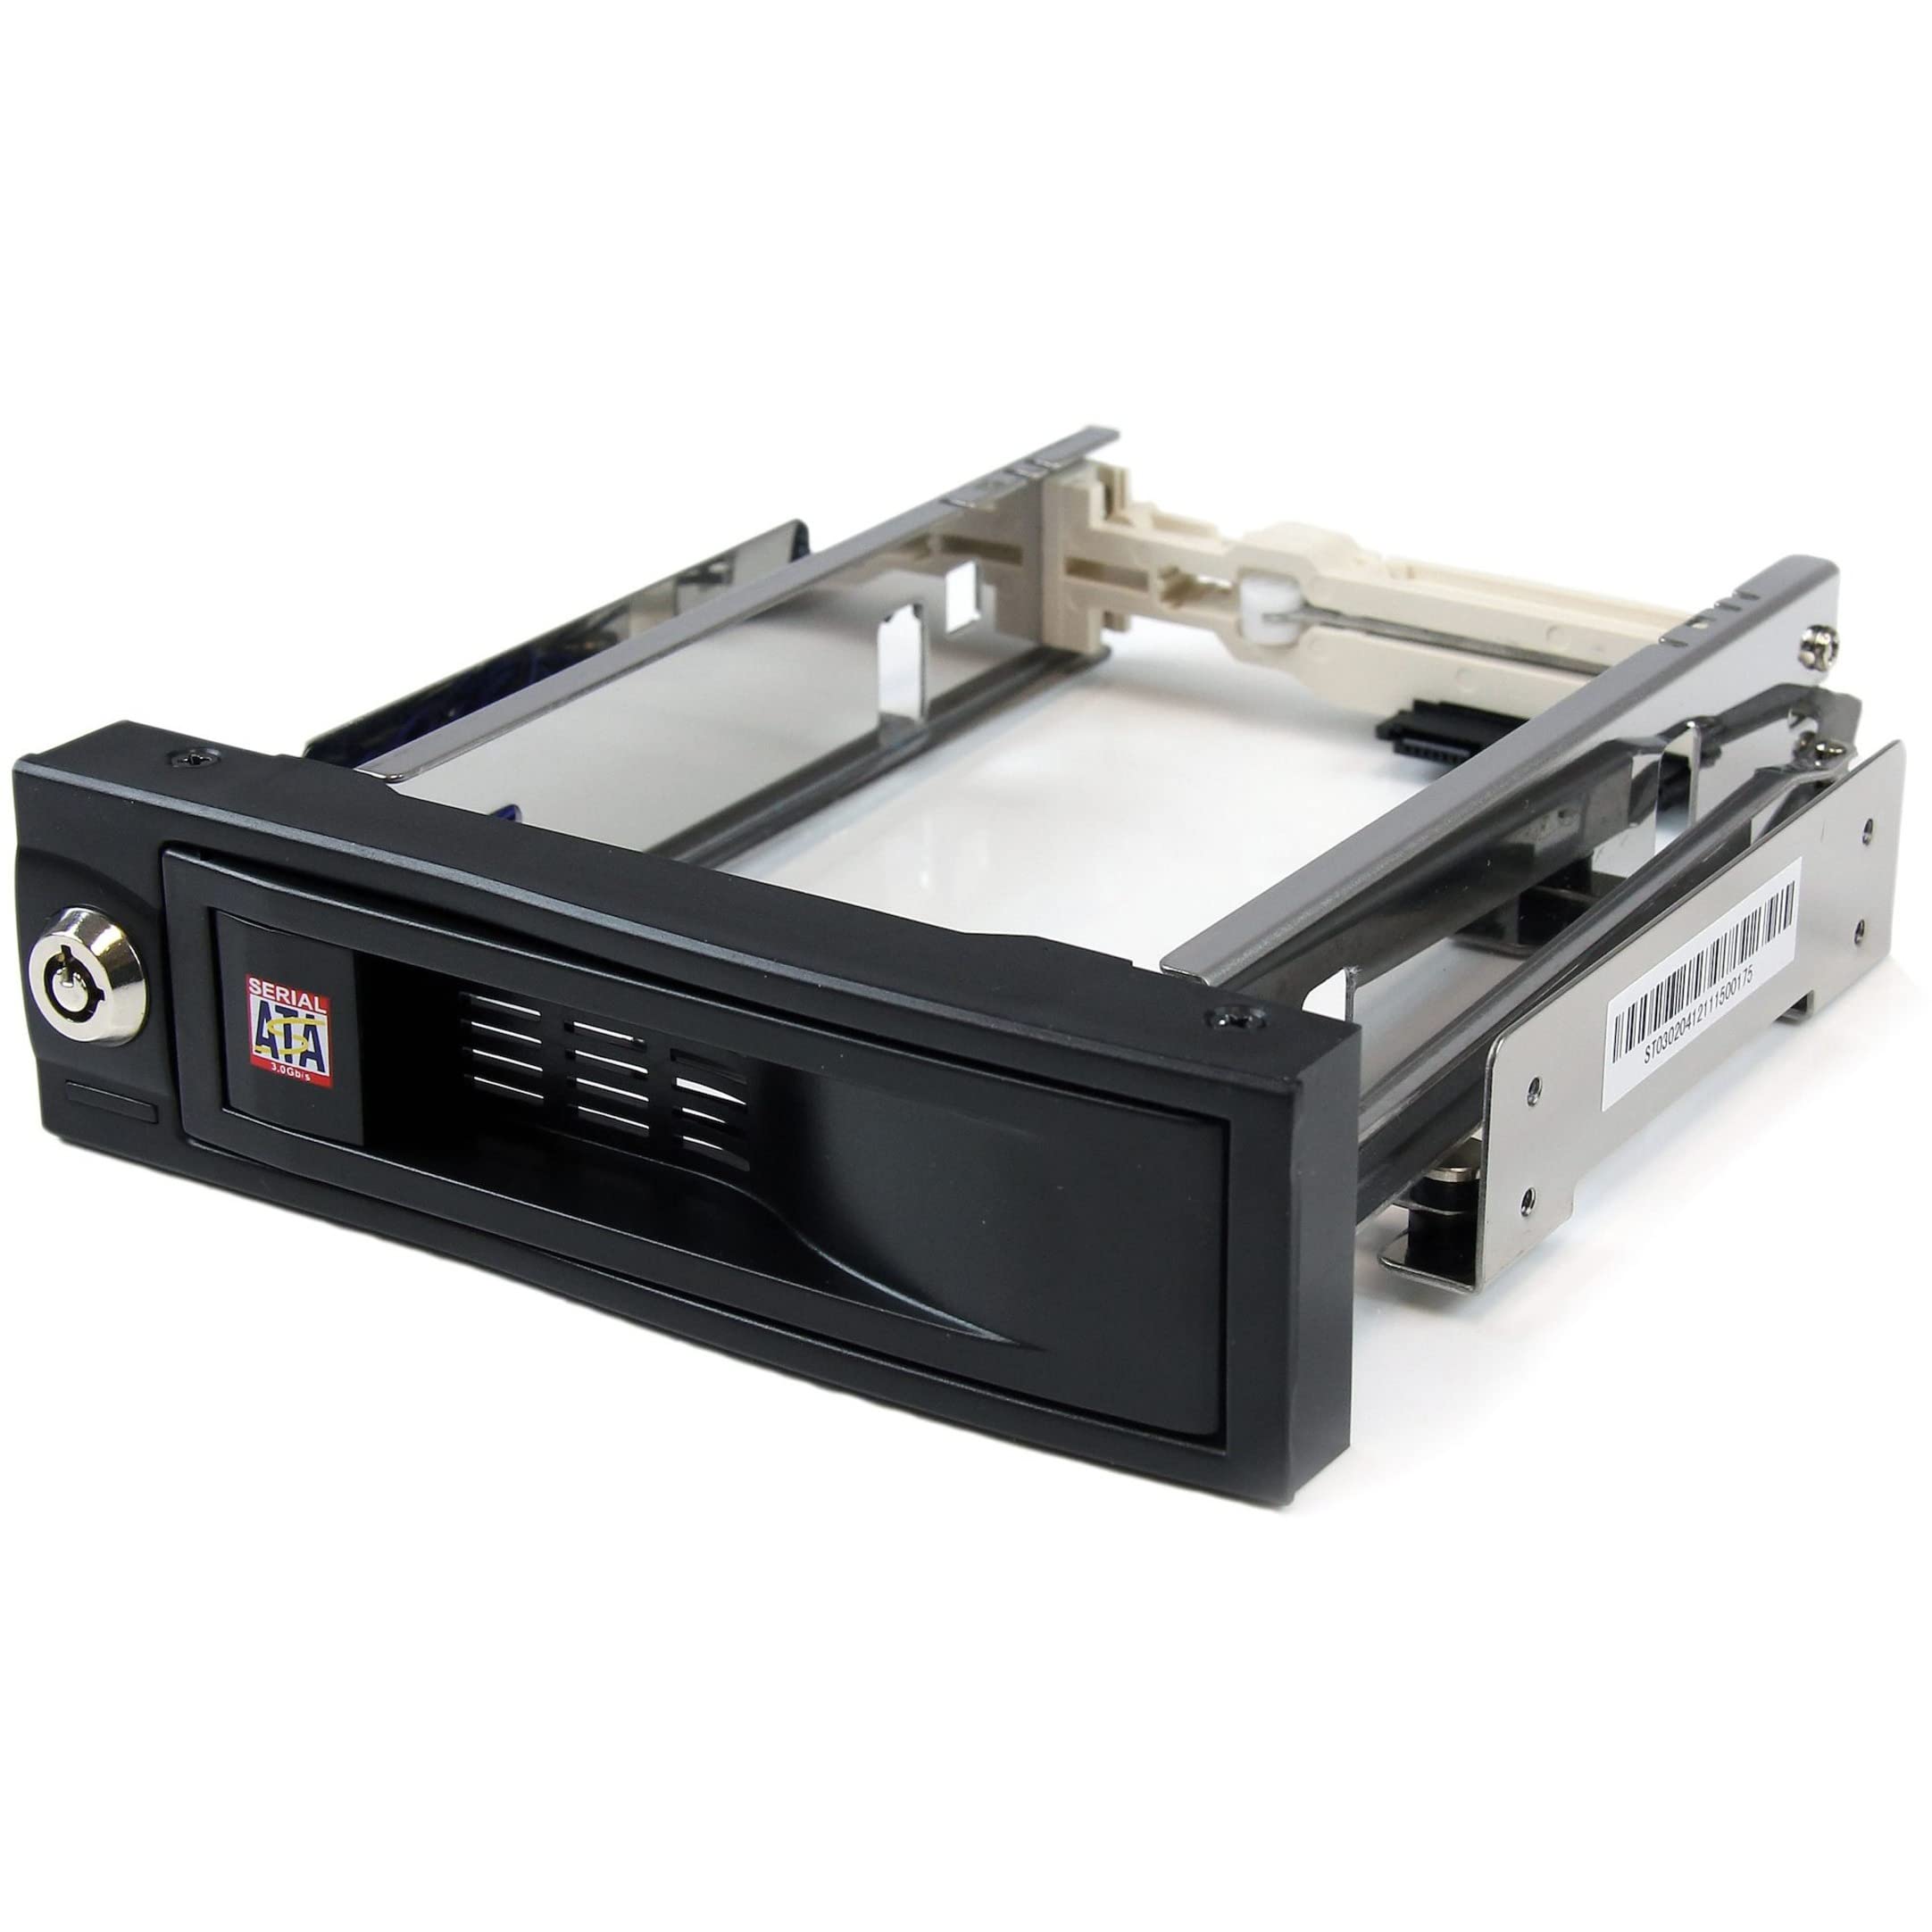 Locate an available drive bay for the new hard drive
Insert the new hard drive into the bay and secure it with screws